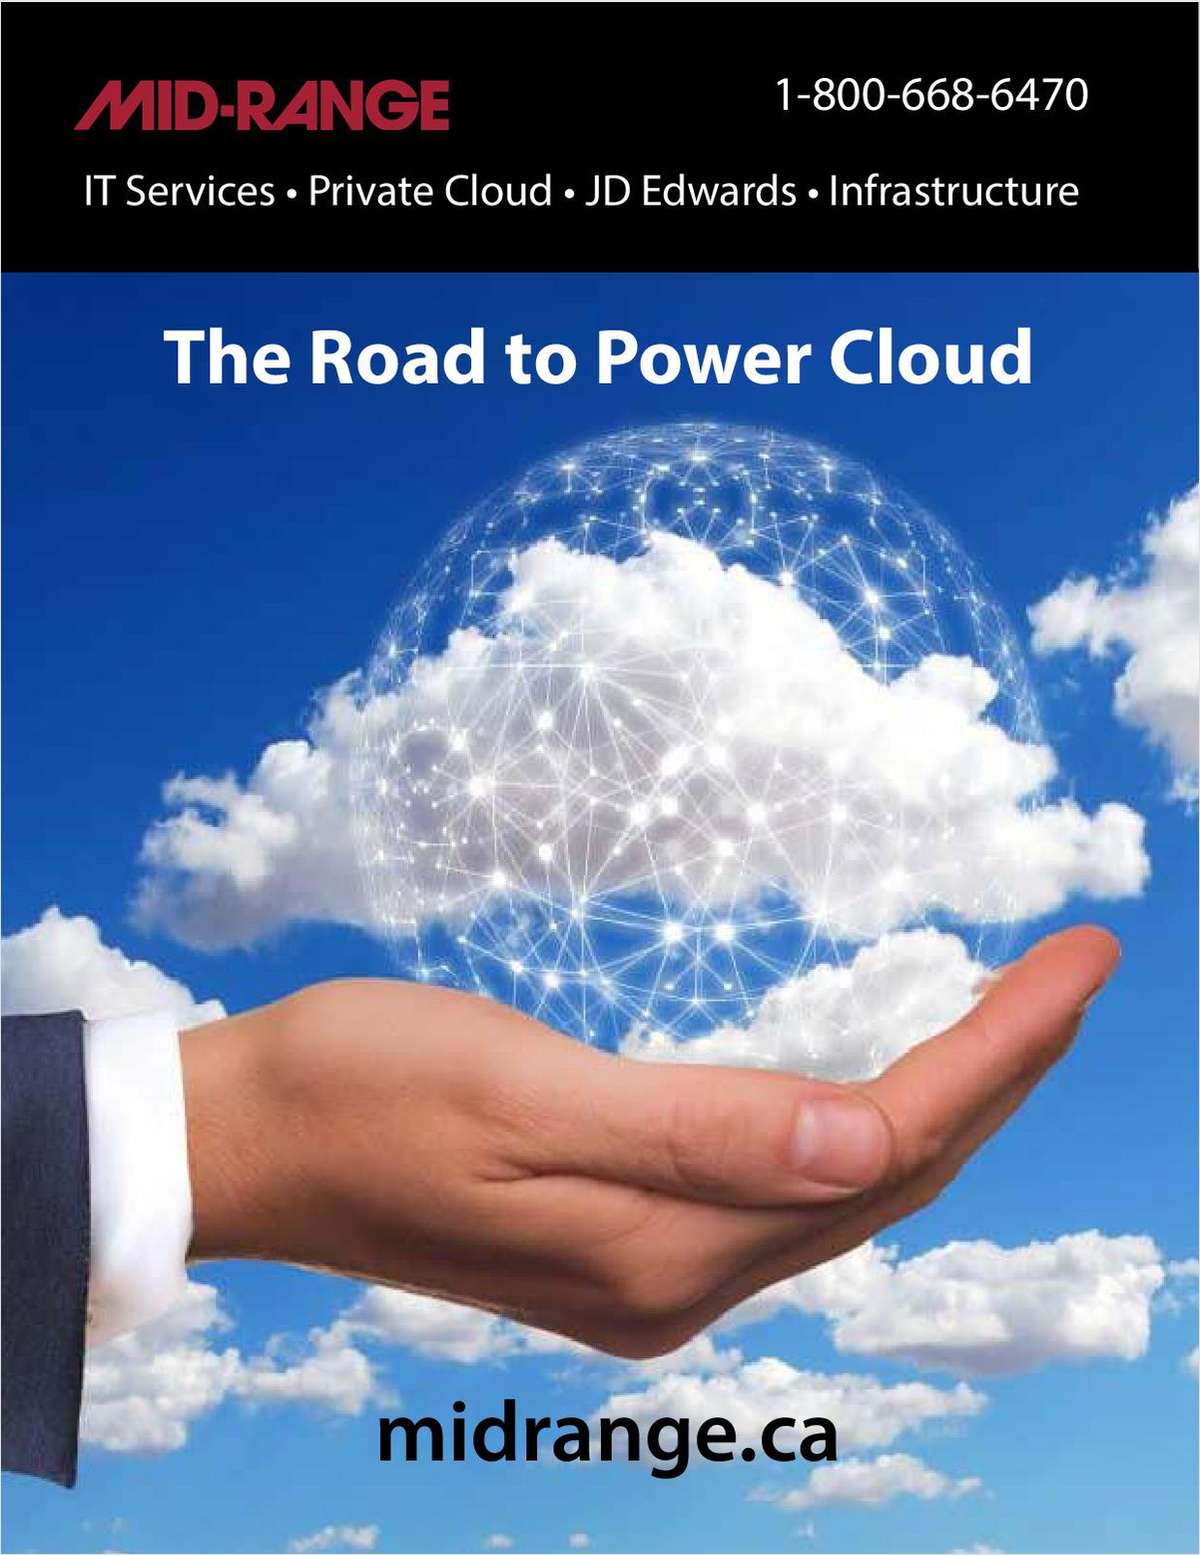 The Road to Power Cloud